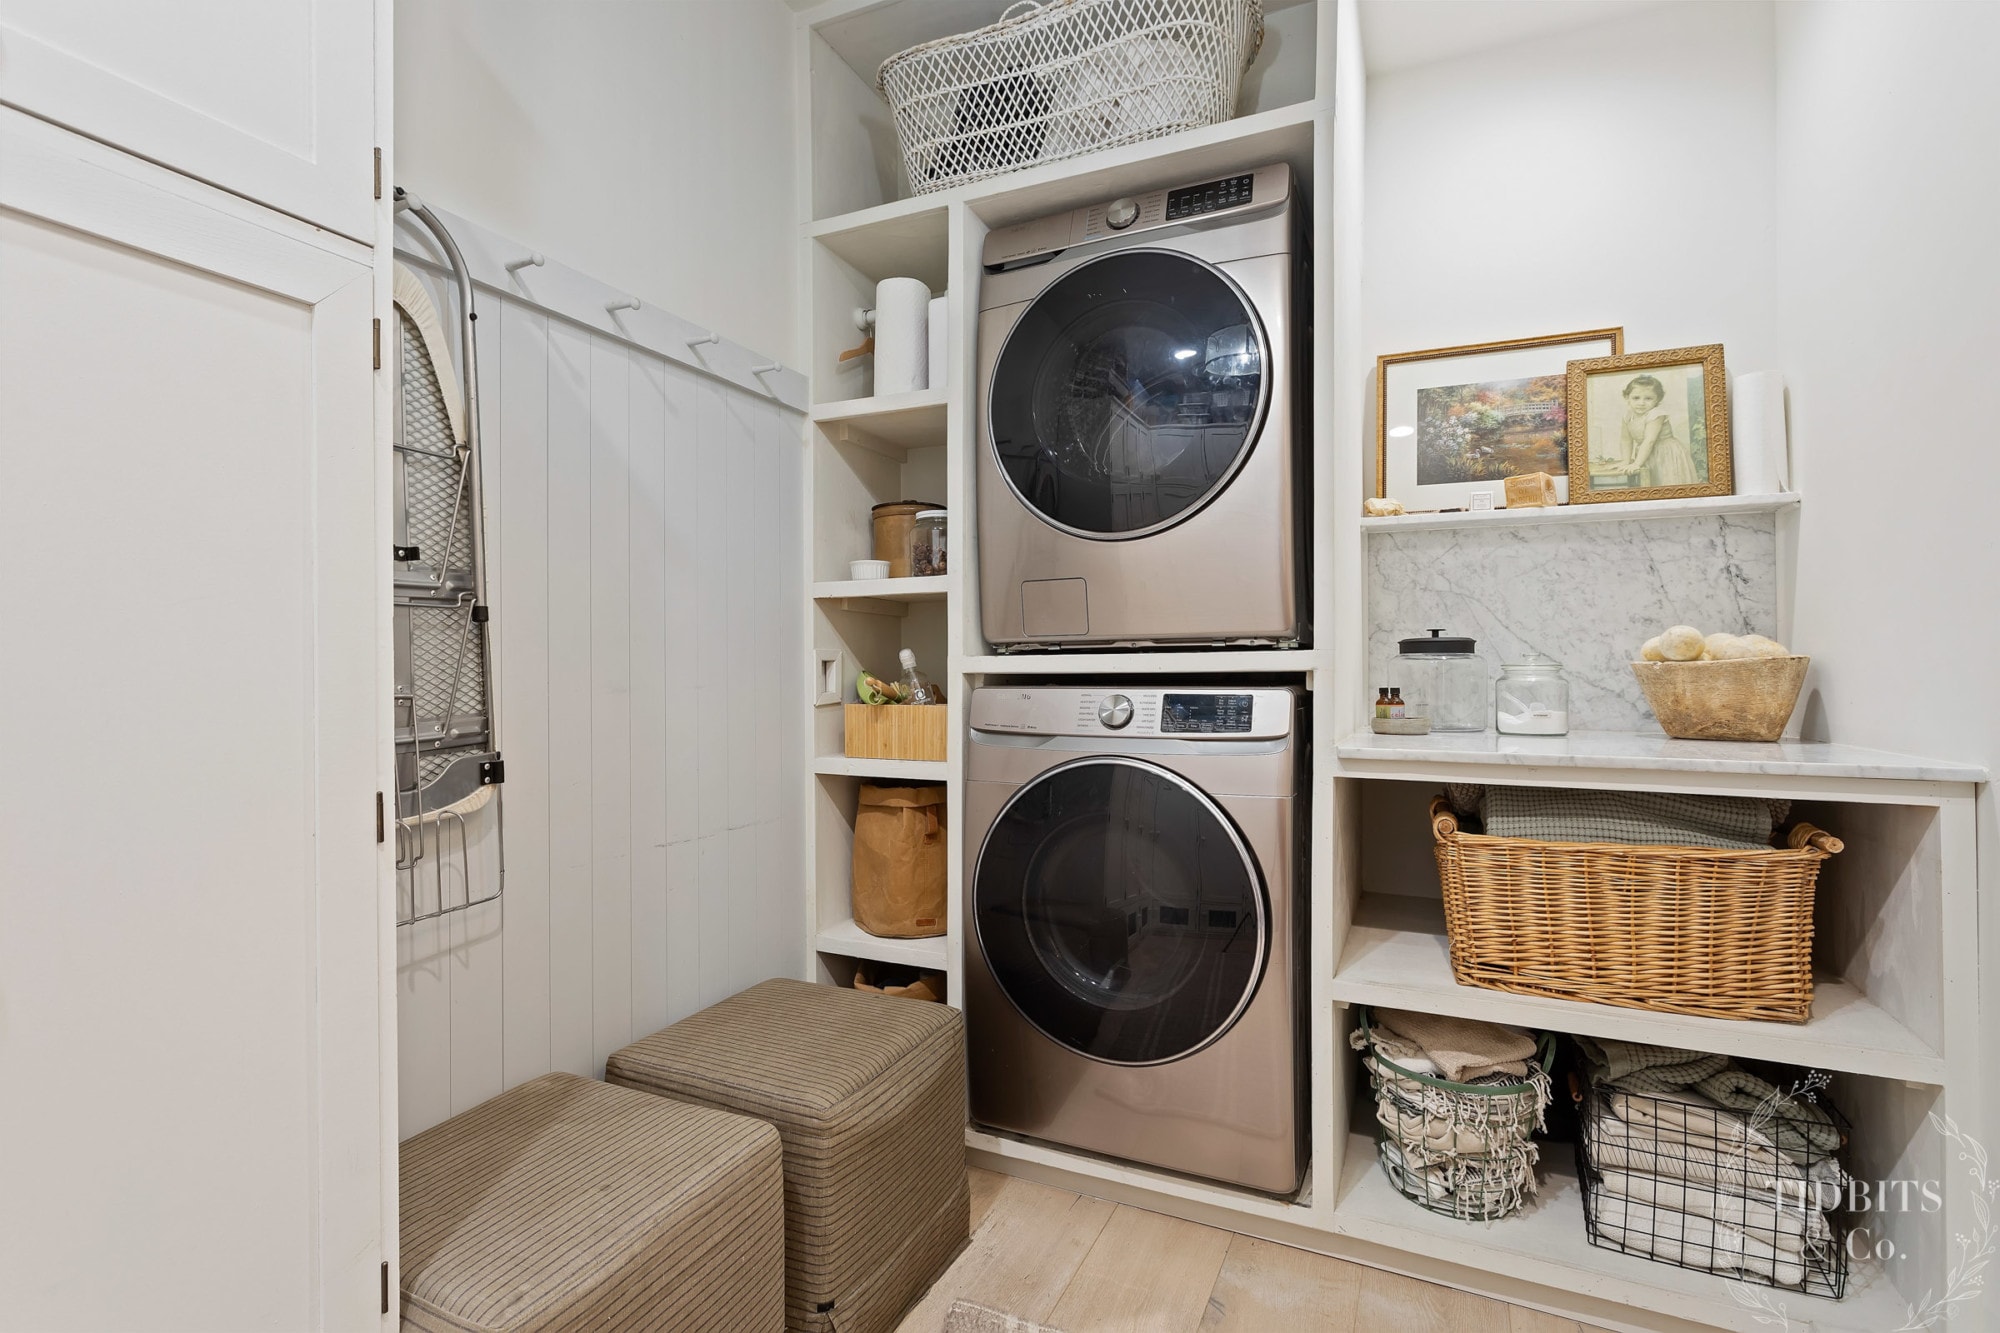 A laundry room with a washer, dryer and baskets for storage